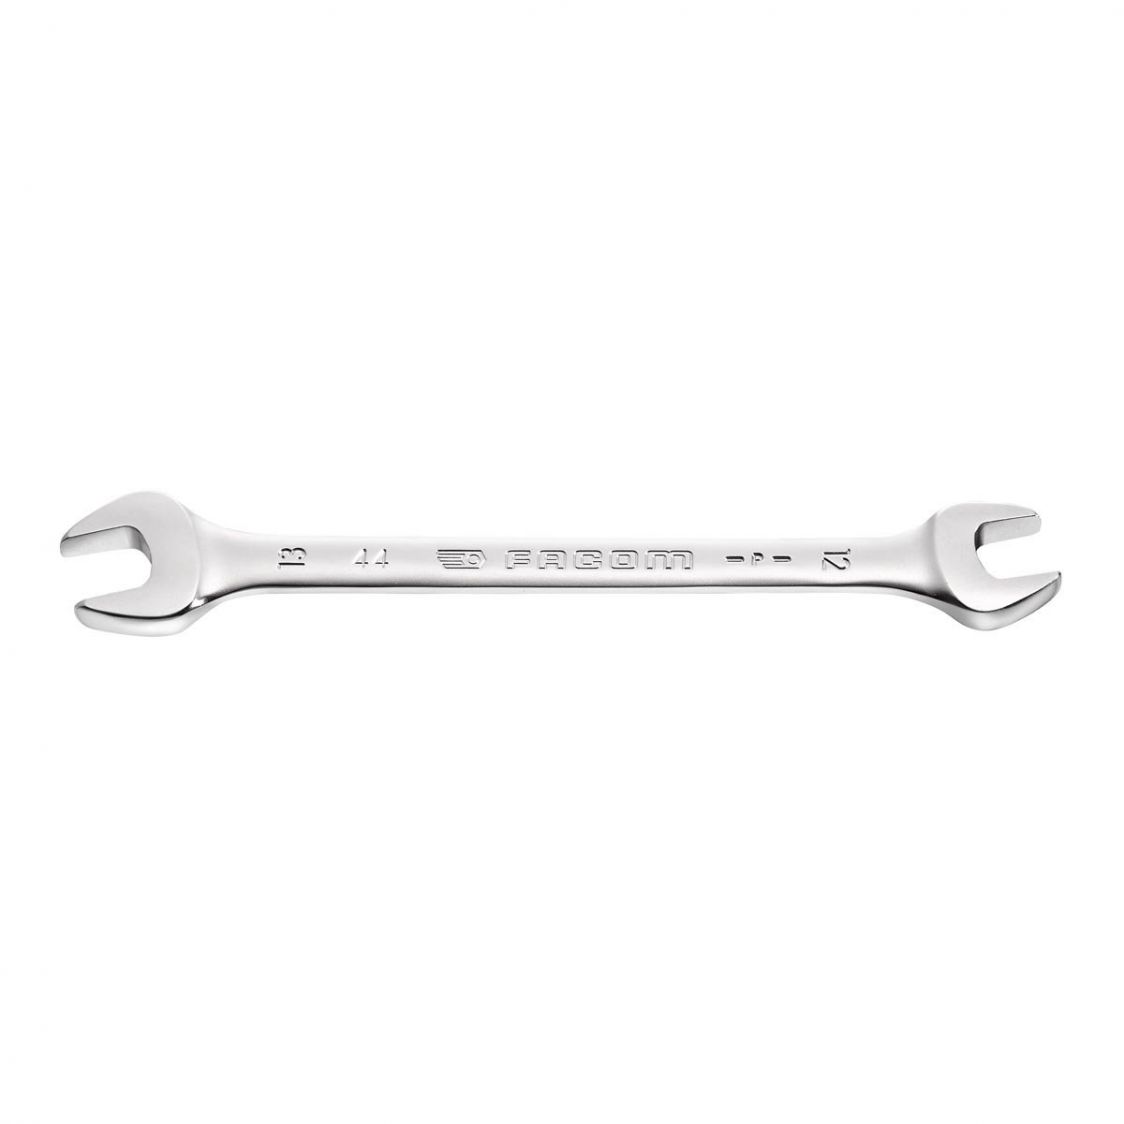 FACOM 44.38X42 - 38x42mm Metric Open Jaw Spanner